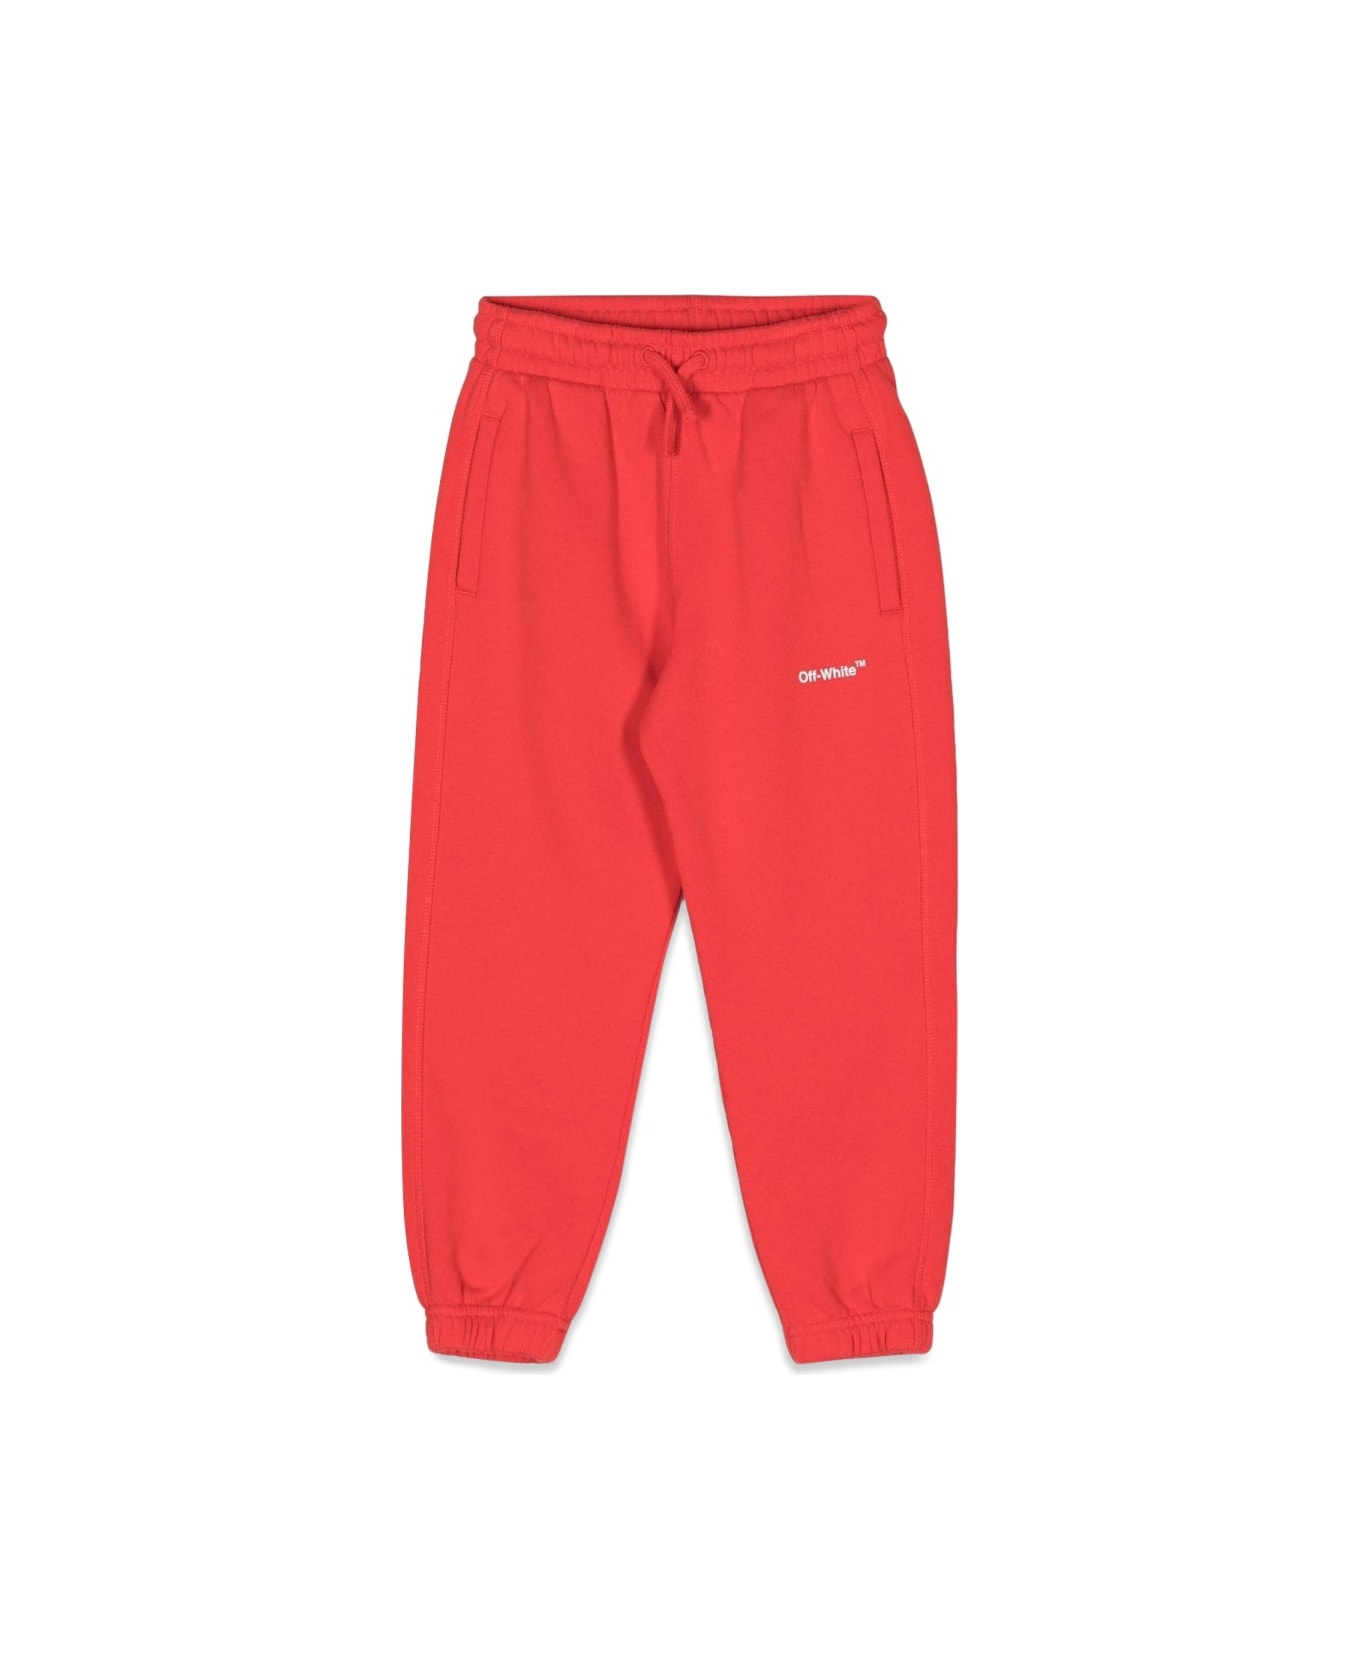 Off-White Sweatpant - RED ボトムス